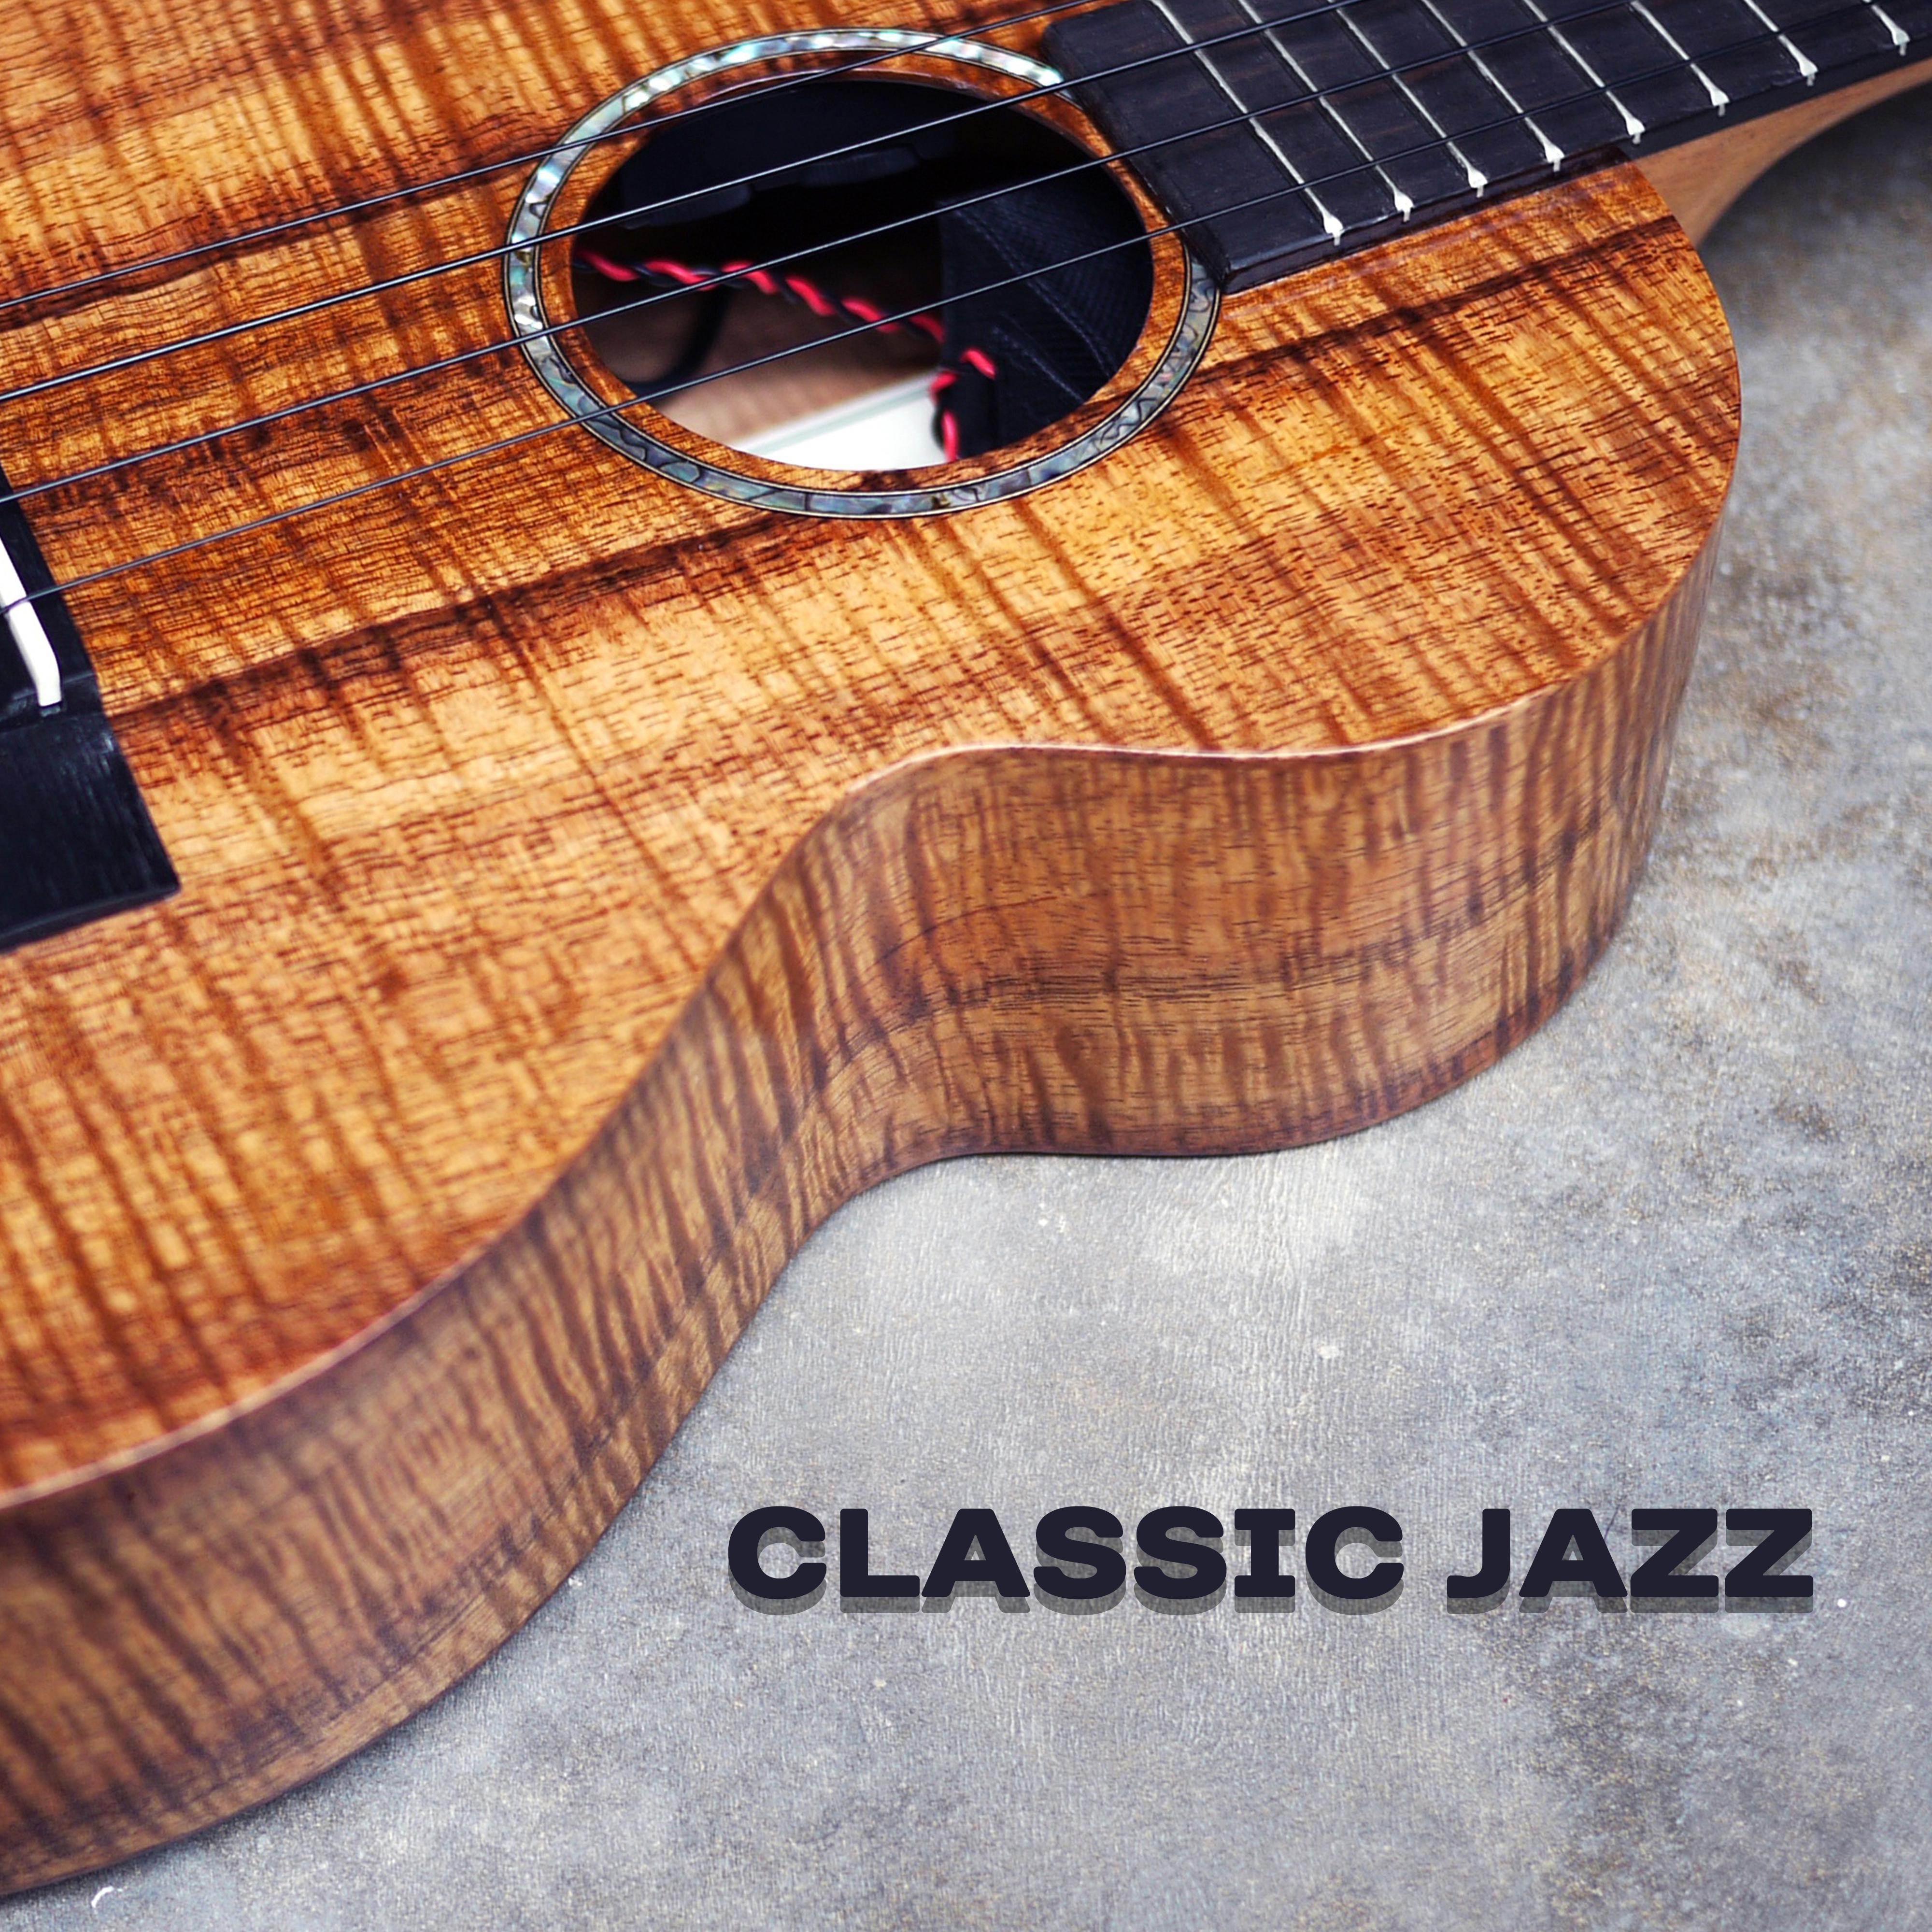 Classic Jazz – Instrumental Sounds for Relaxation, Jazz Cafe, Restaurant Music, Soothing Piano, Deep Rest, Music for Jazz Club, Peaceful Mind, Mellow Jazz